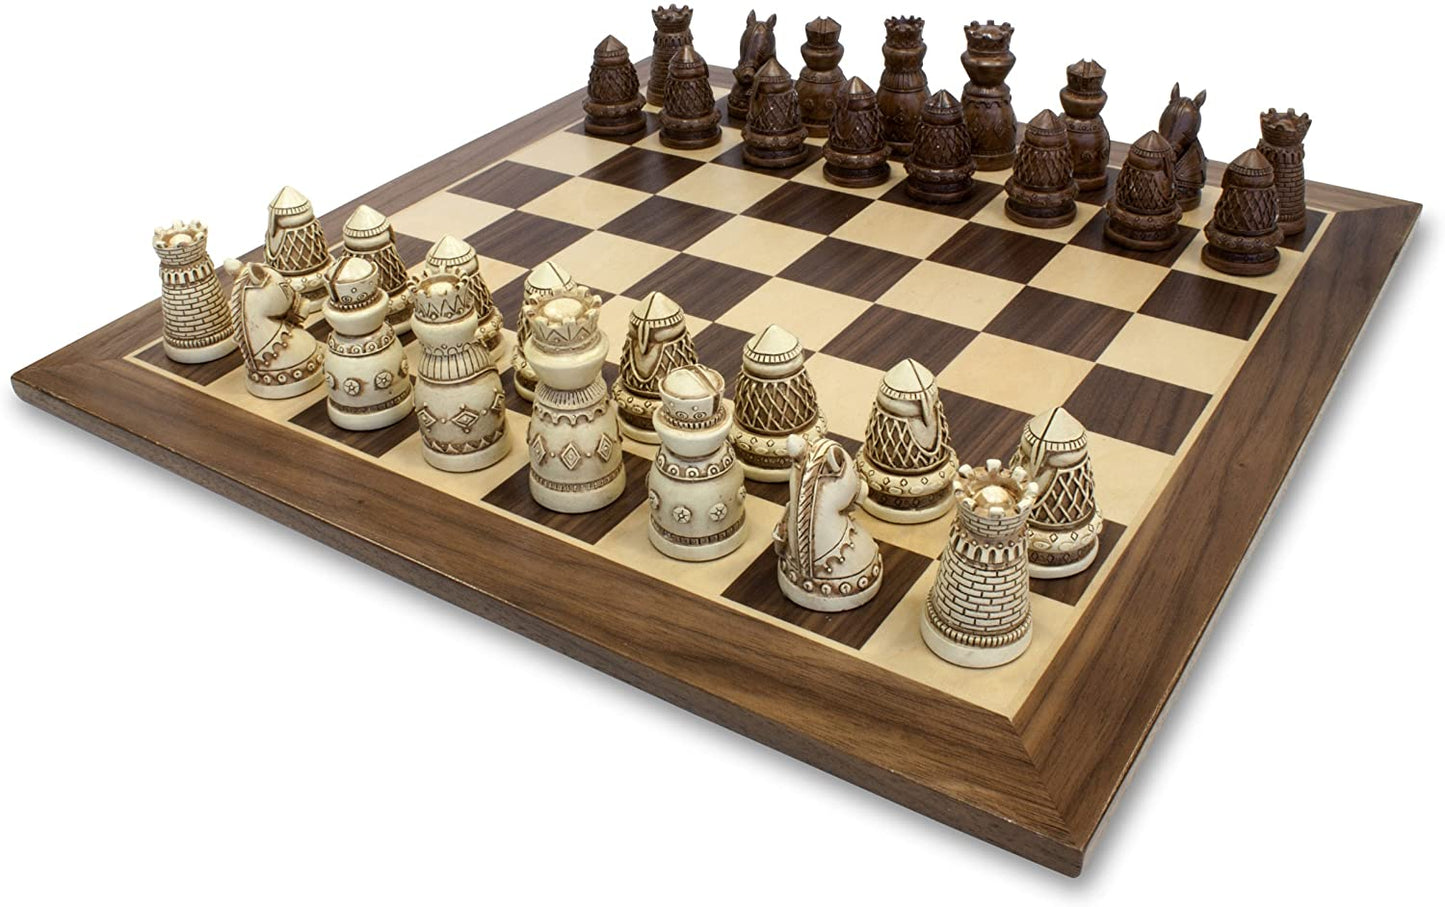 15" MEDIEVAL CHESS SET (WOOD)